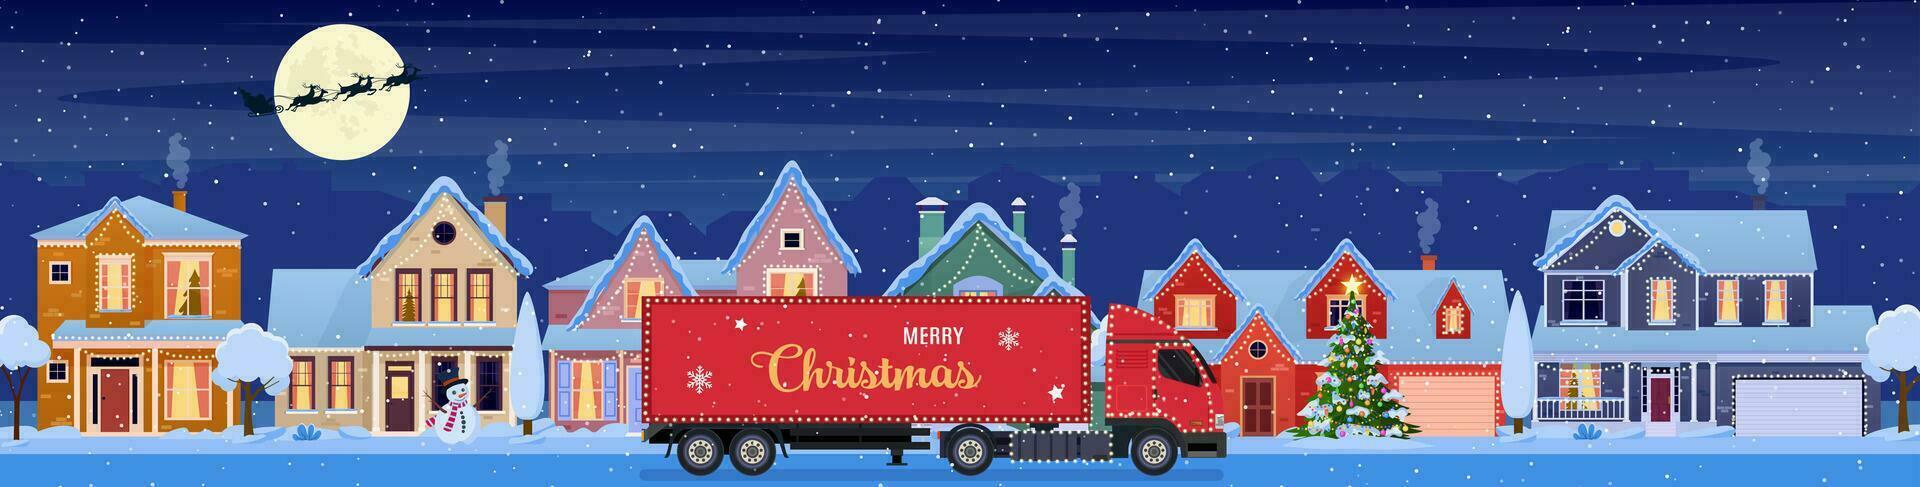 Residential houses with christmas decoration at night. red delivery truck on background with cartoon winter landscape. street and holiday garlands, christmas tree, snowman. Vector illustration